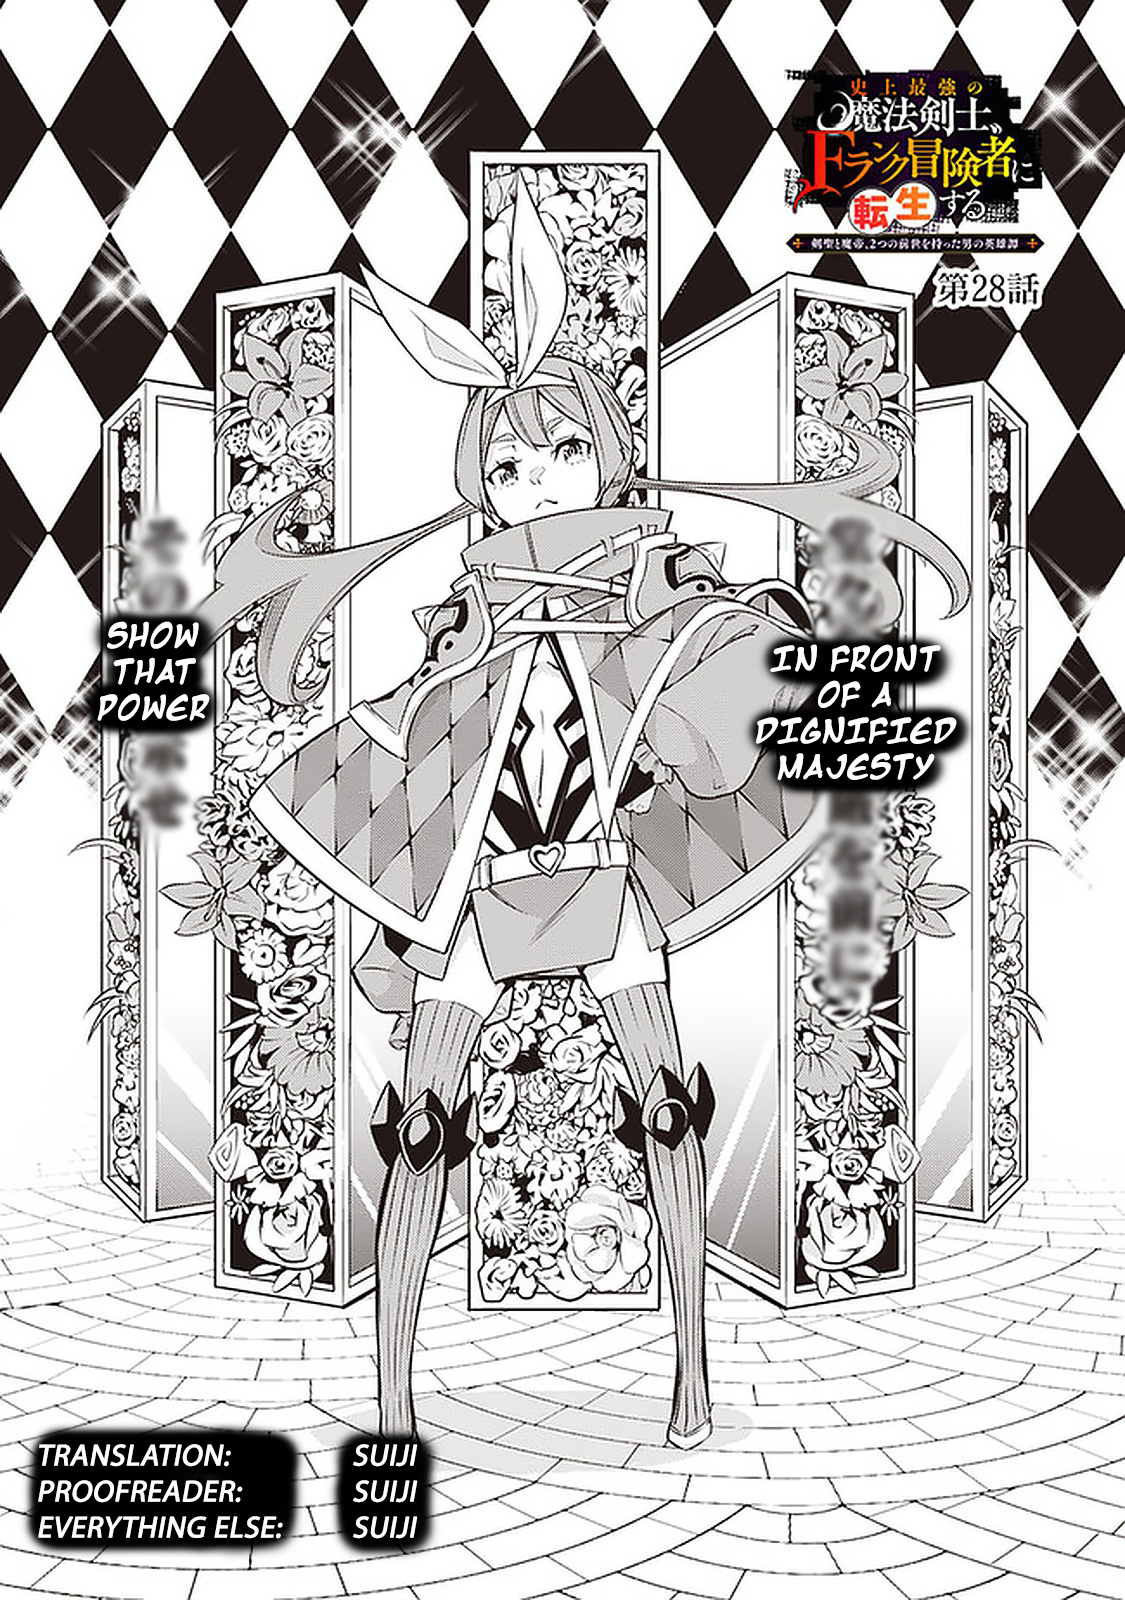 The Strongest Magical Swordsman Ever Reborn As An F-Rank Adventurer. Vol.3 Chapter 28 - Picture 3